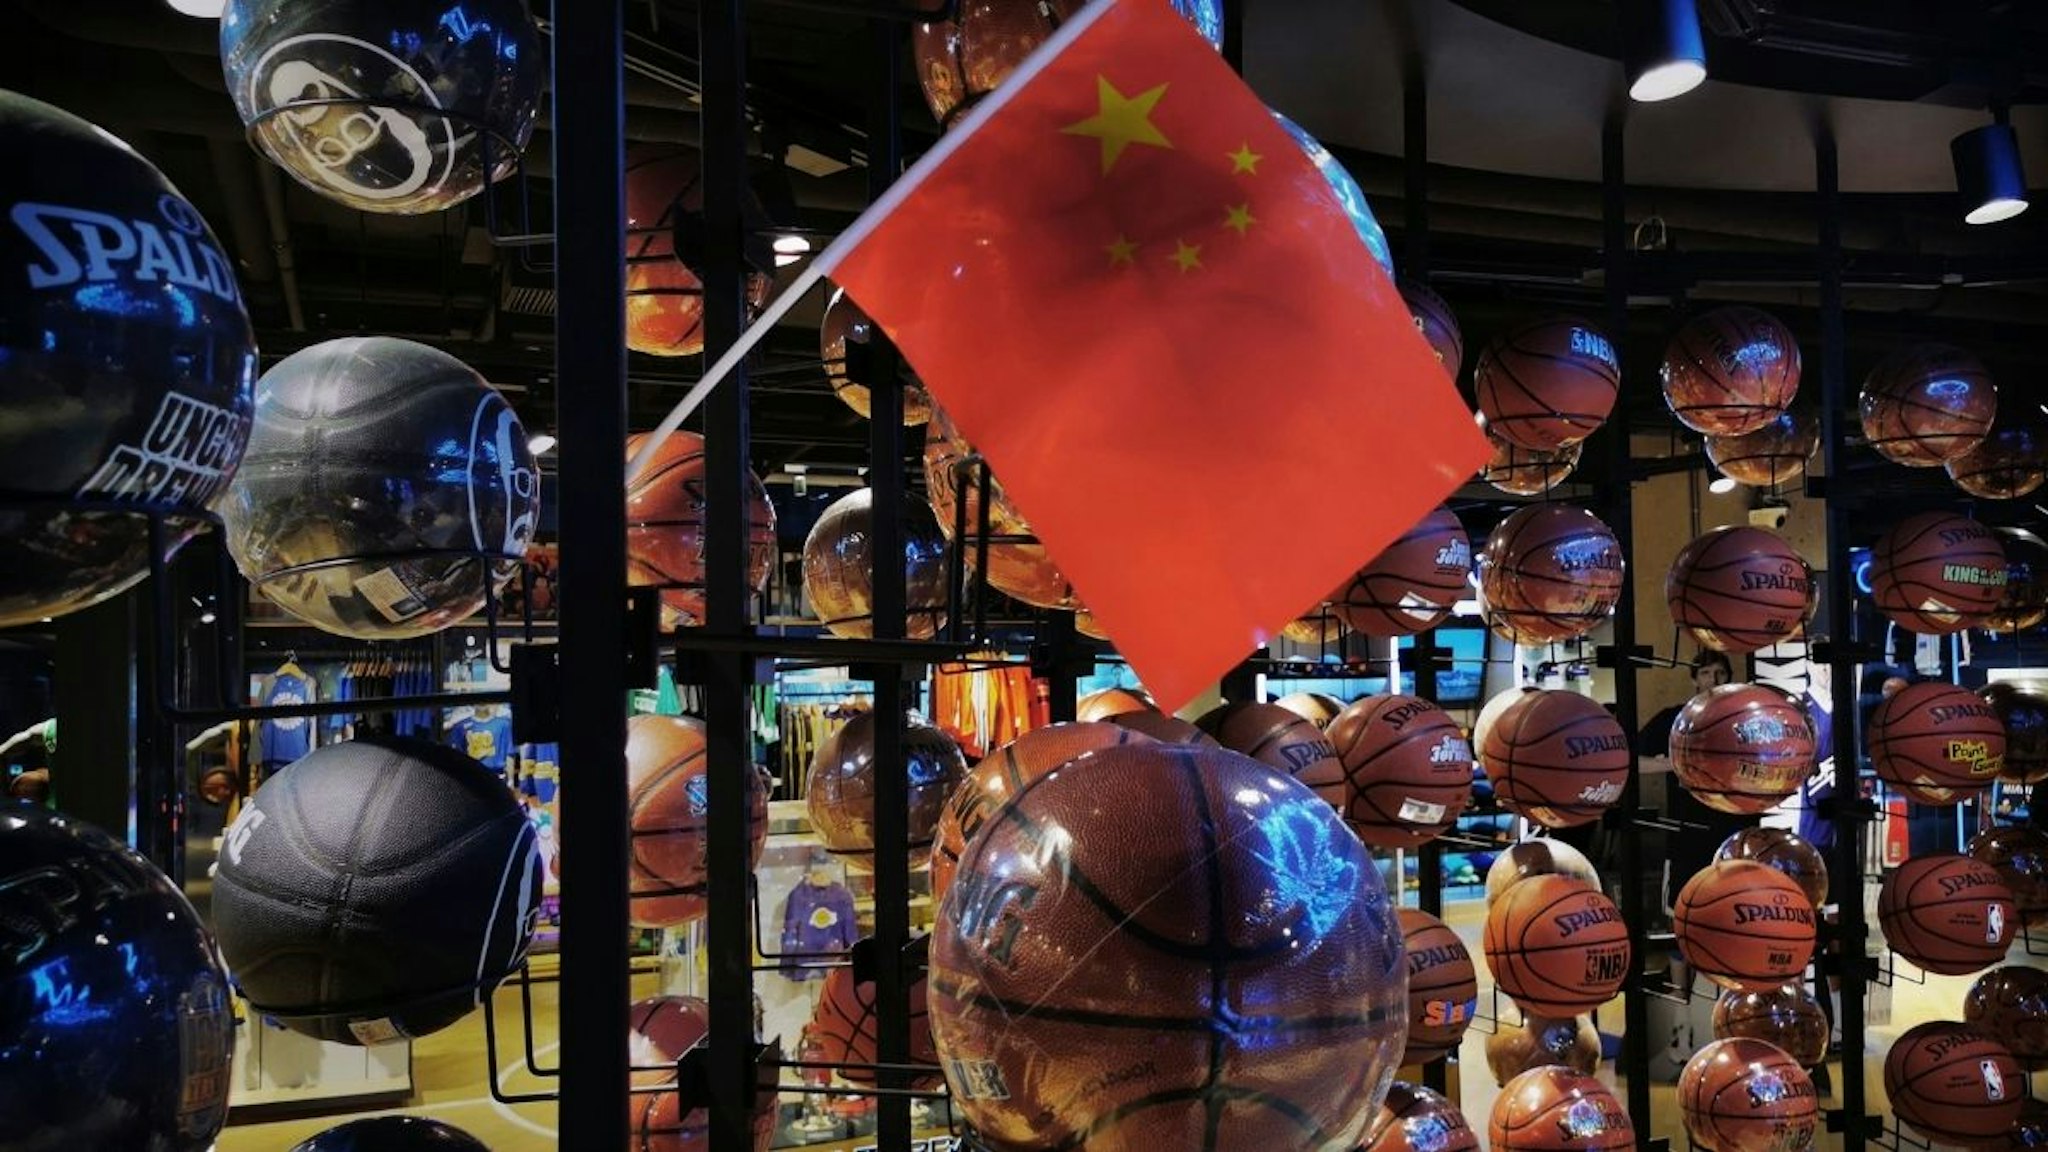 A Chinese flag is seen placed on basketballs in the NBA flagship retail store on October 9, 2019 in Beijing, China.